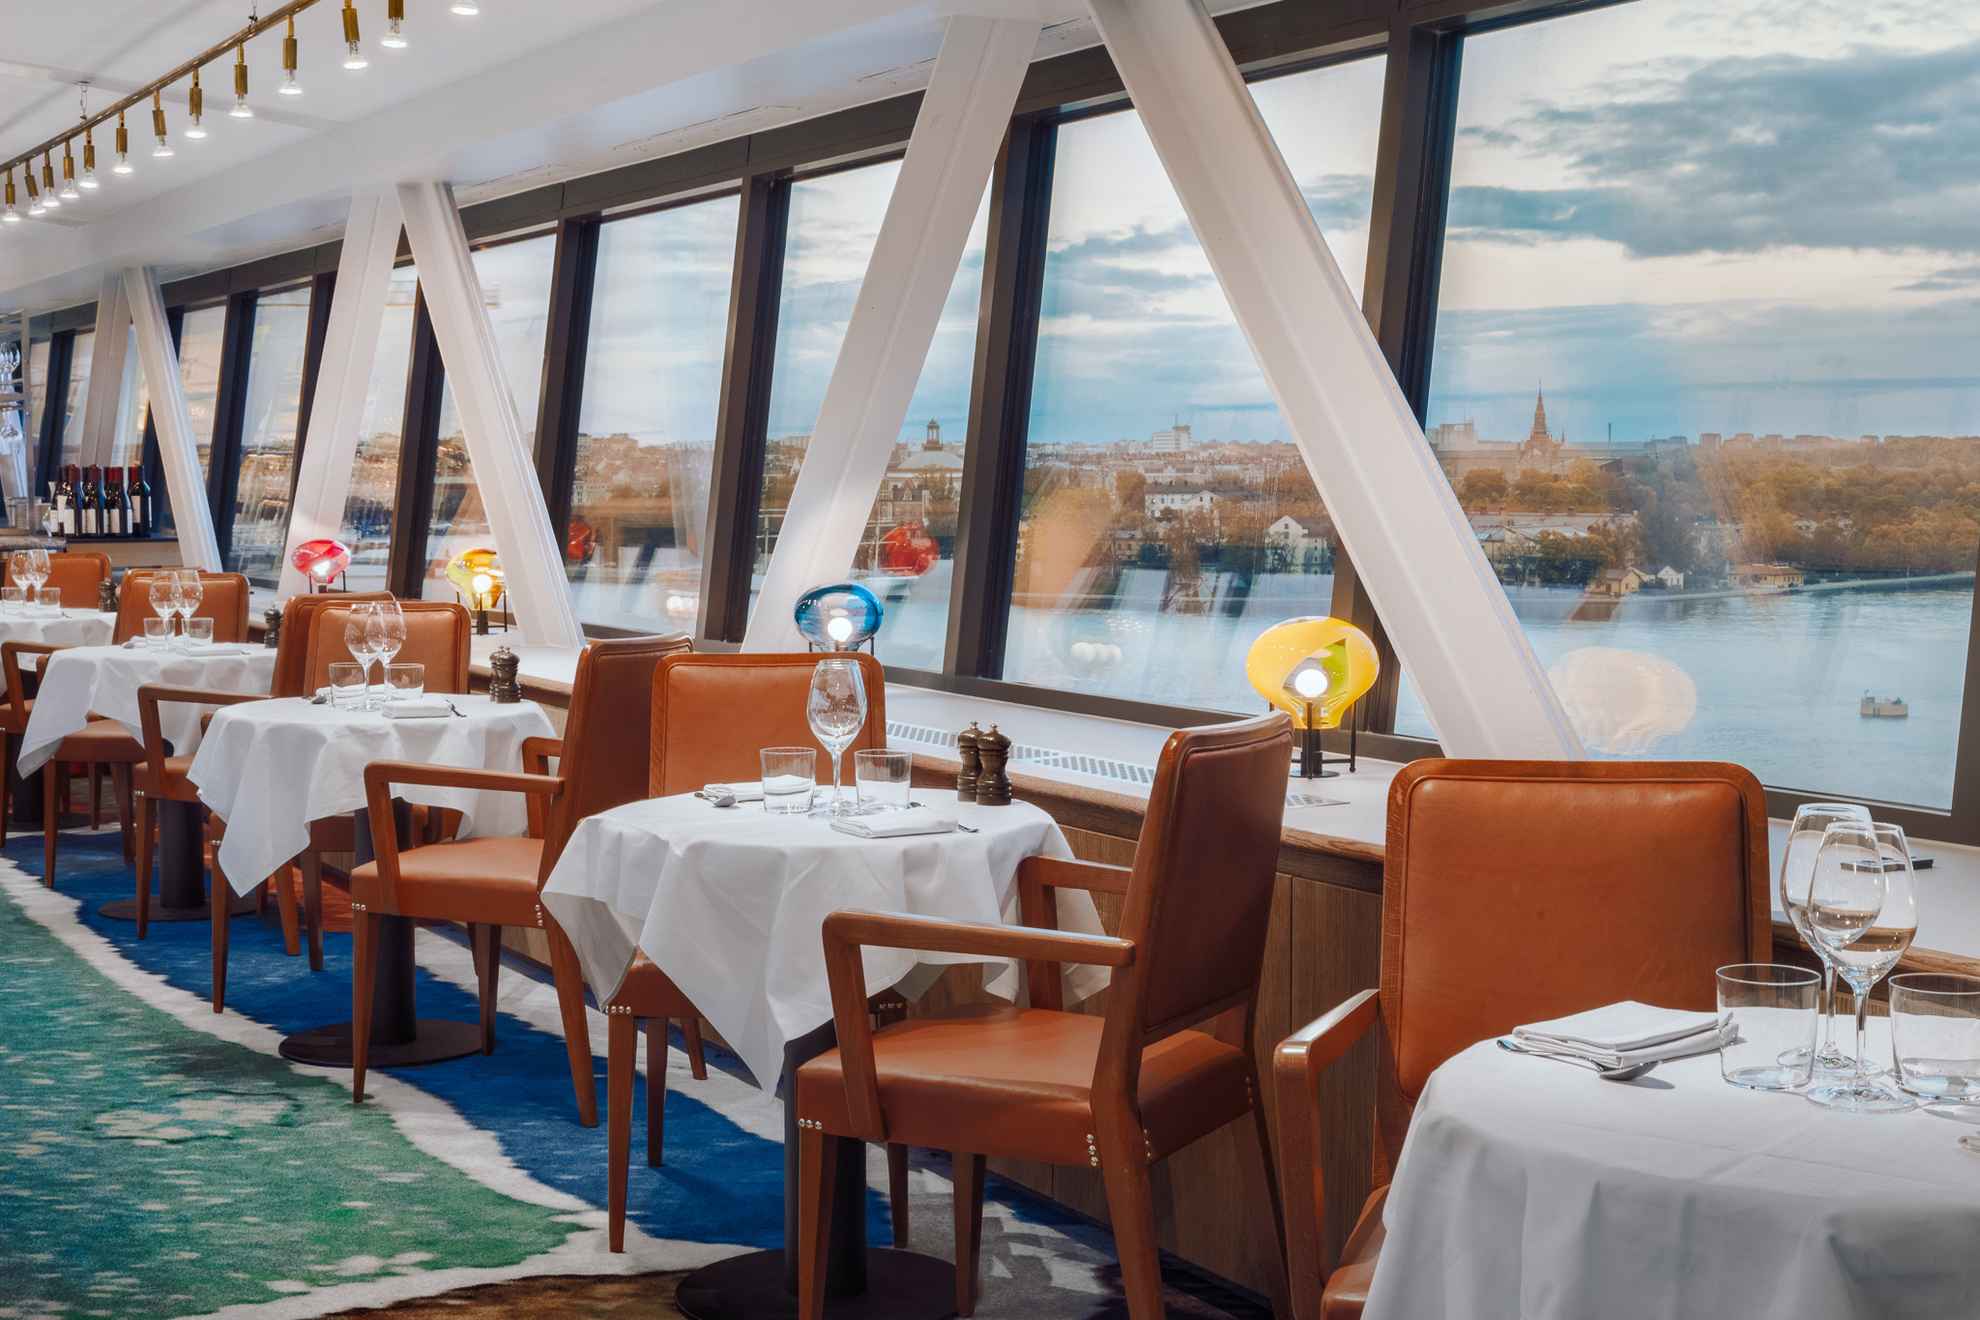 Tables and chairs at restaurant Gondolen with large windows overlooking the water.